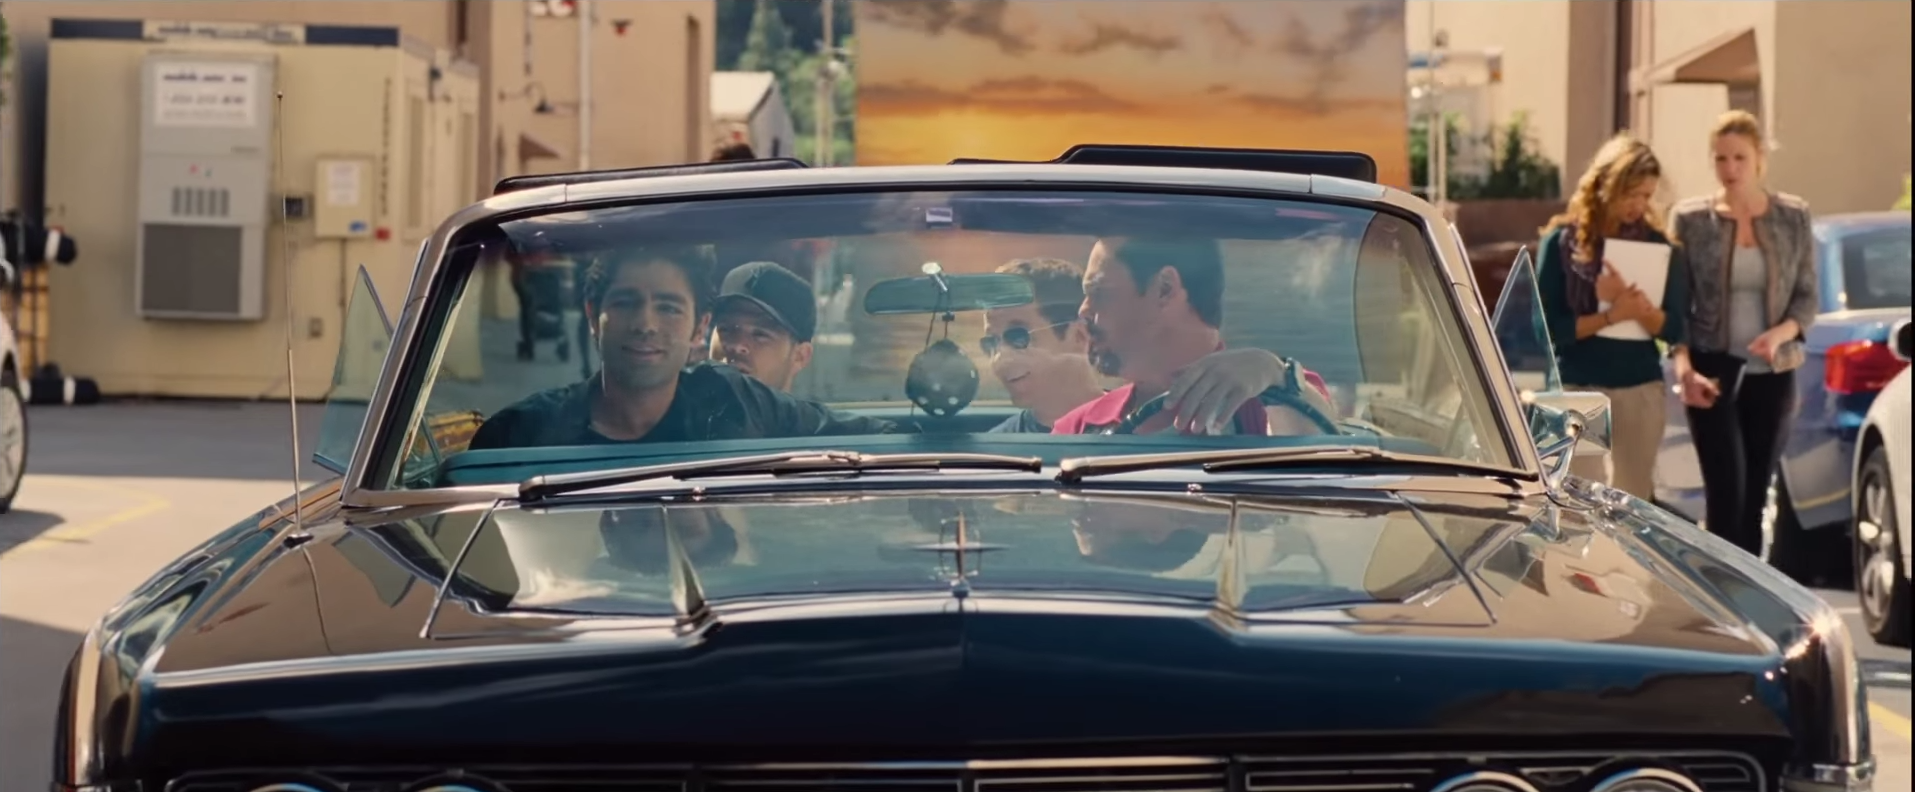 Entourage the Movie. Photo by: Warner Brothers Pictures / YouTube